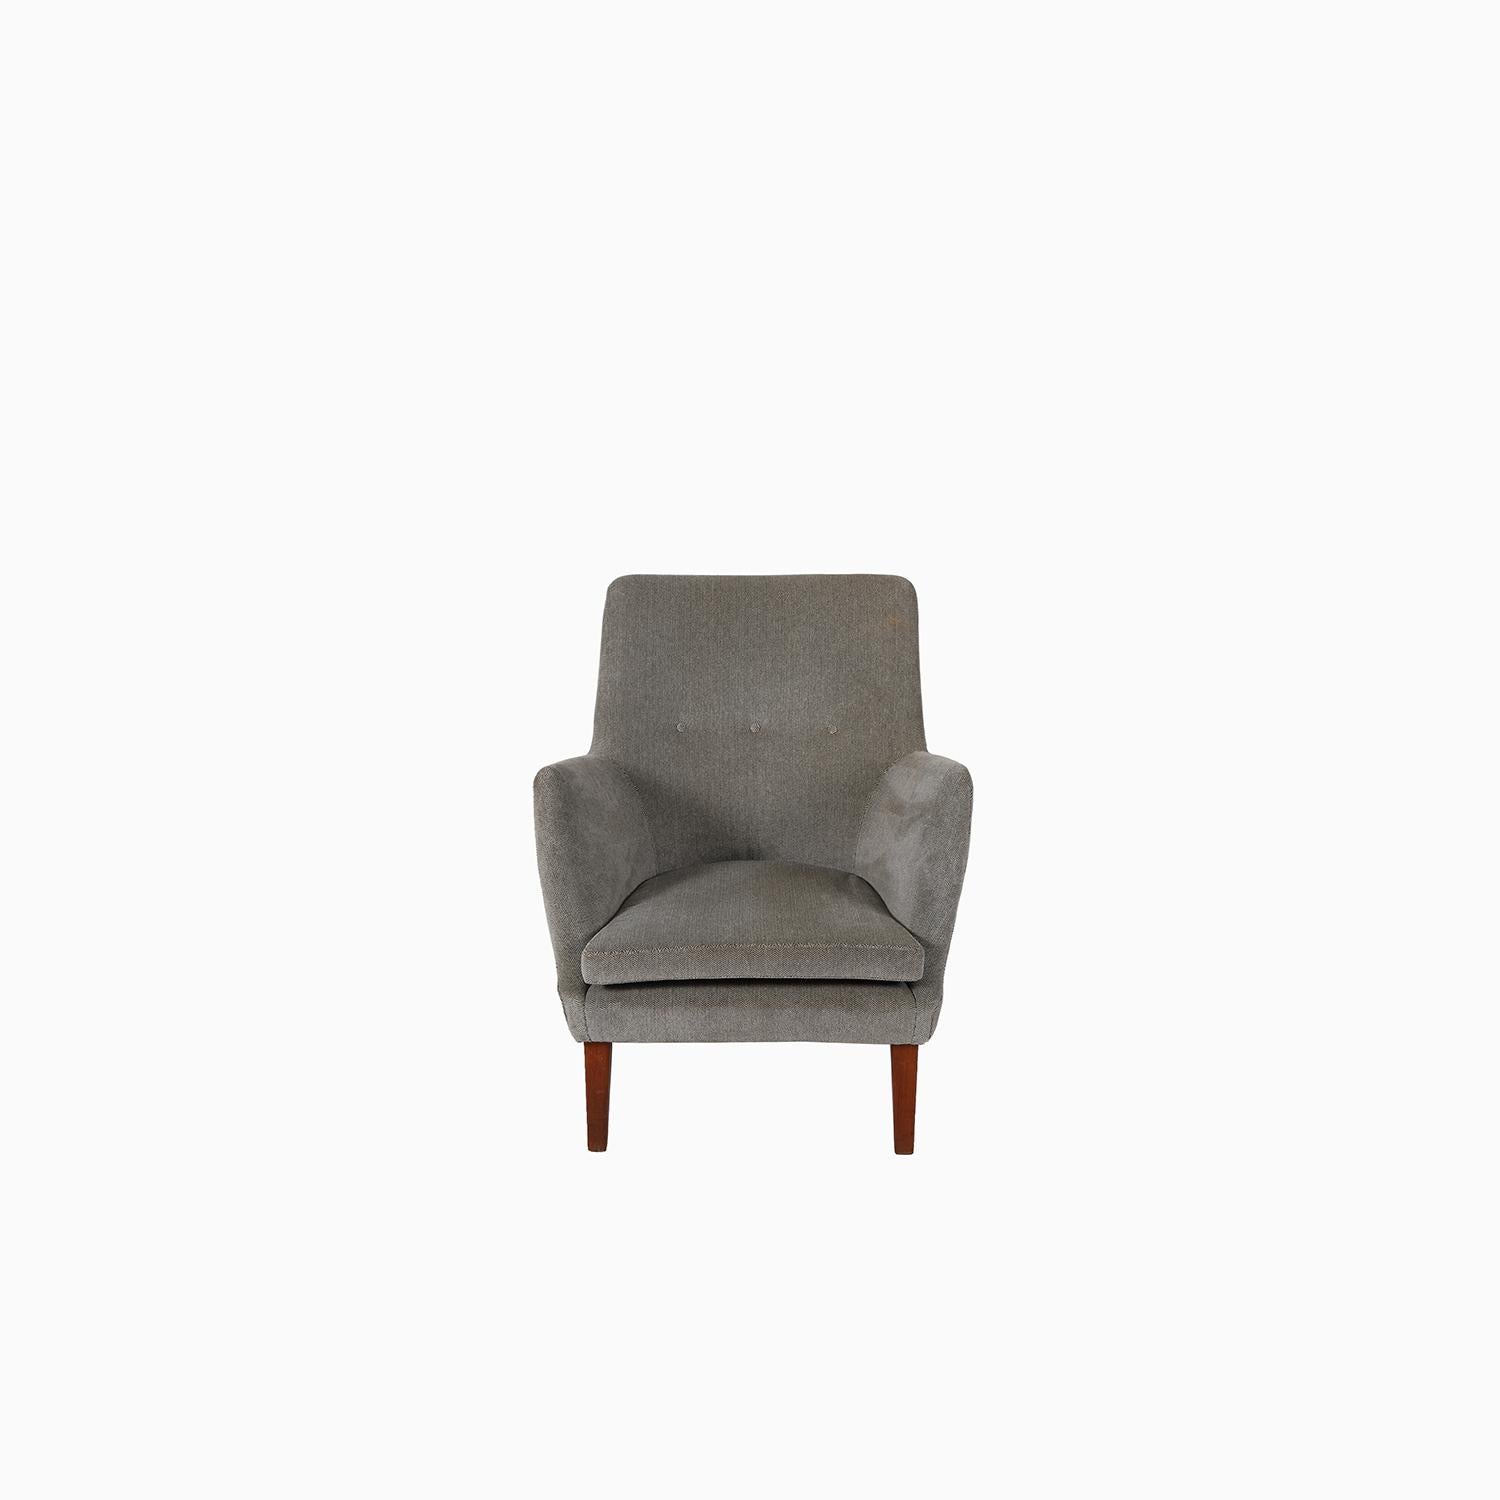 A rare early production AV 53 lounge chair designed by Arne Vodder and produced by Ivan Schlechter. This design is a softer form and takes from the more tradition design vocabulary. A beautiful refinement. For sale with existing upholstery, or we